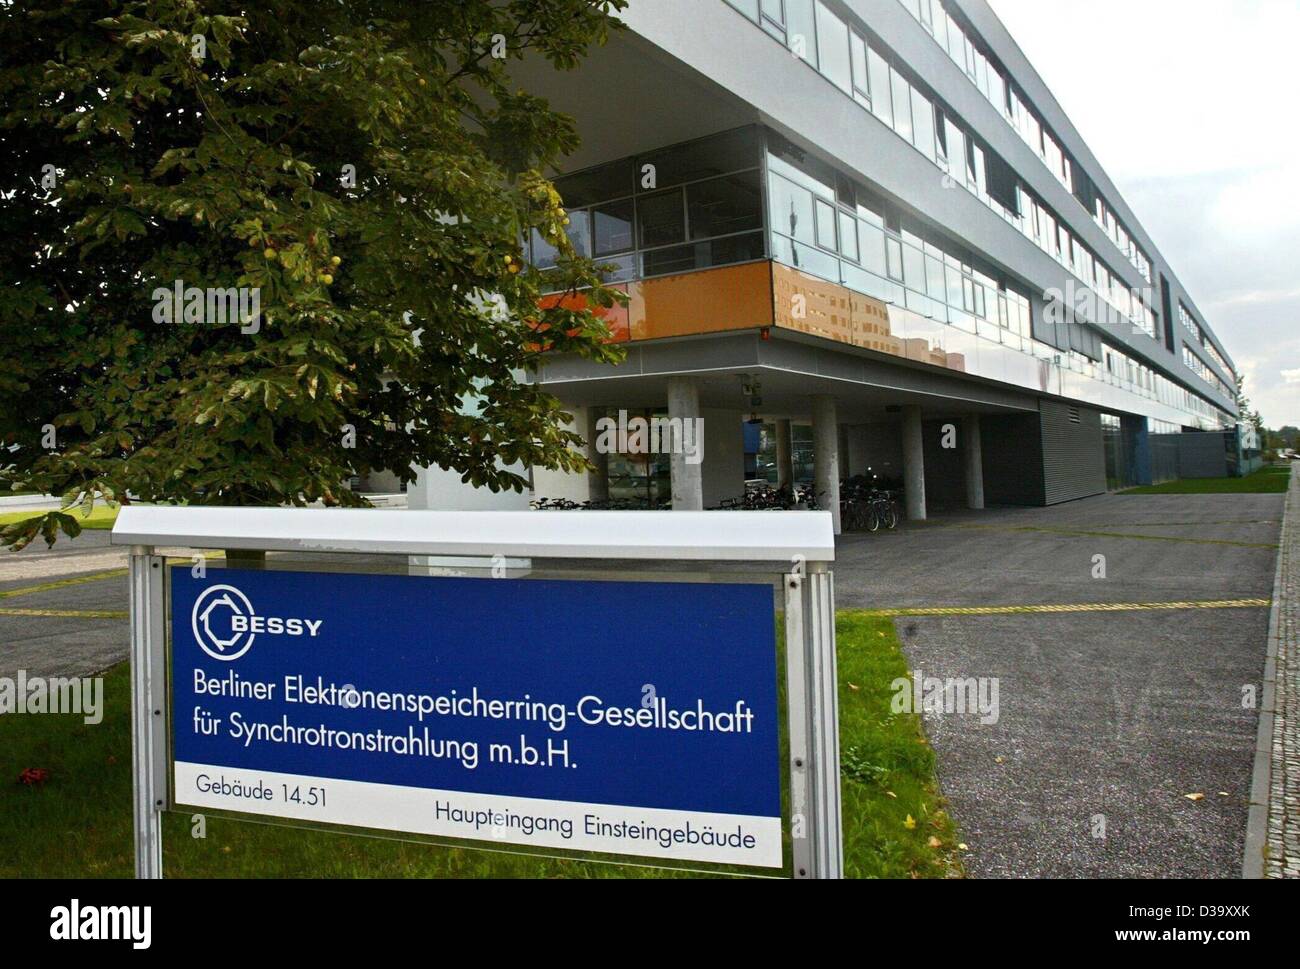 A view of the main entrance to the Einstein building (Einsteingebaeude) of the 'Berlin electron storage ring company for synchrotron radiation', BESSY (Berliner Elektronenspeicherring-Gesellschaft fuer Synchrotronstrahlung), in Berlin-Adlershof, Germany, 1 October 2003. Stock Photo